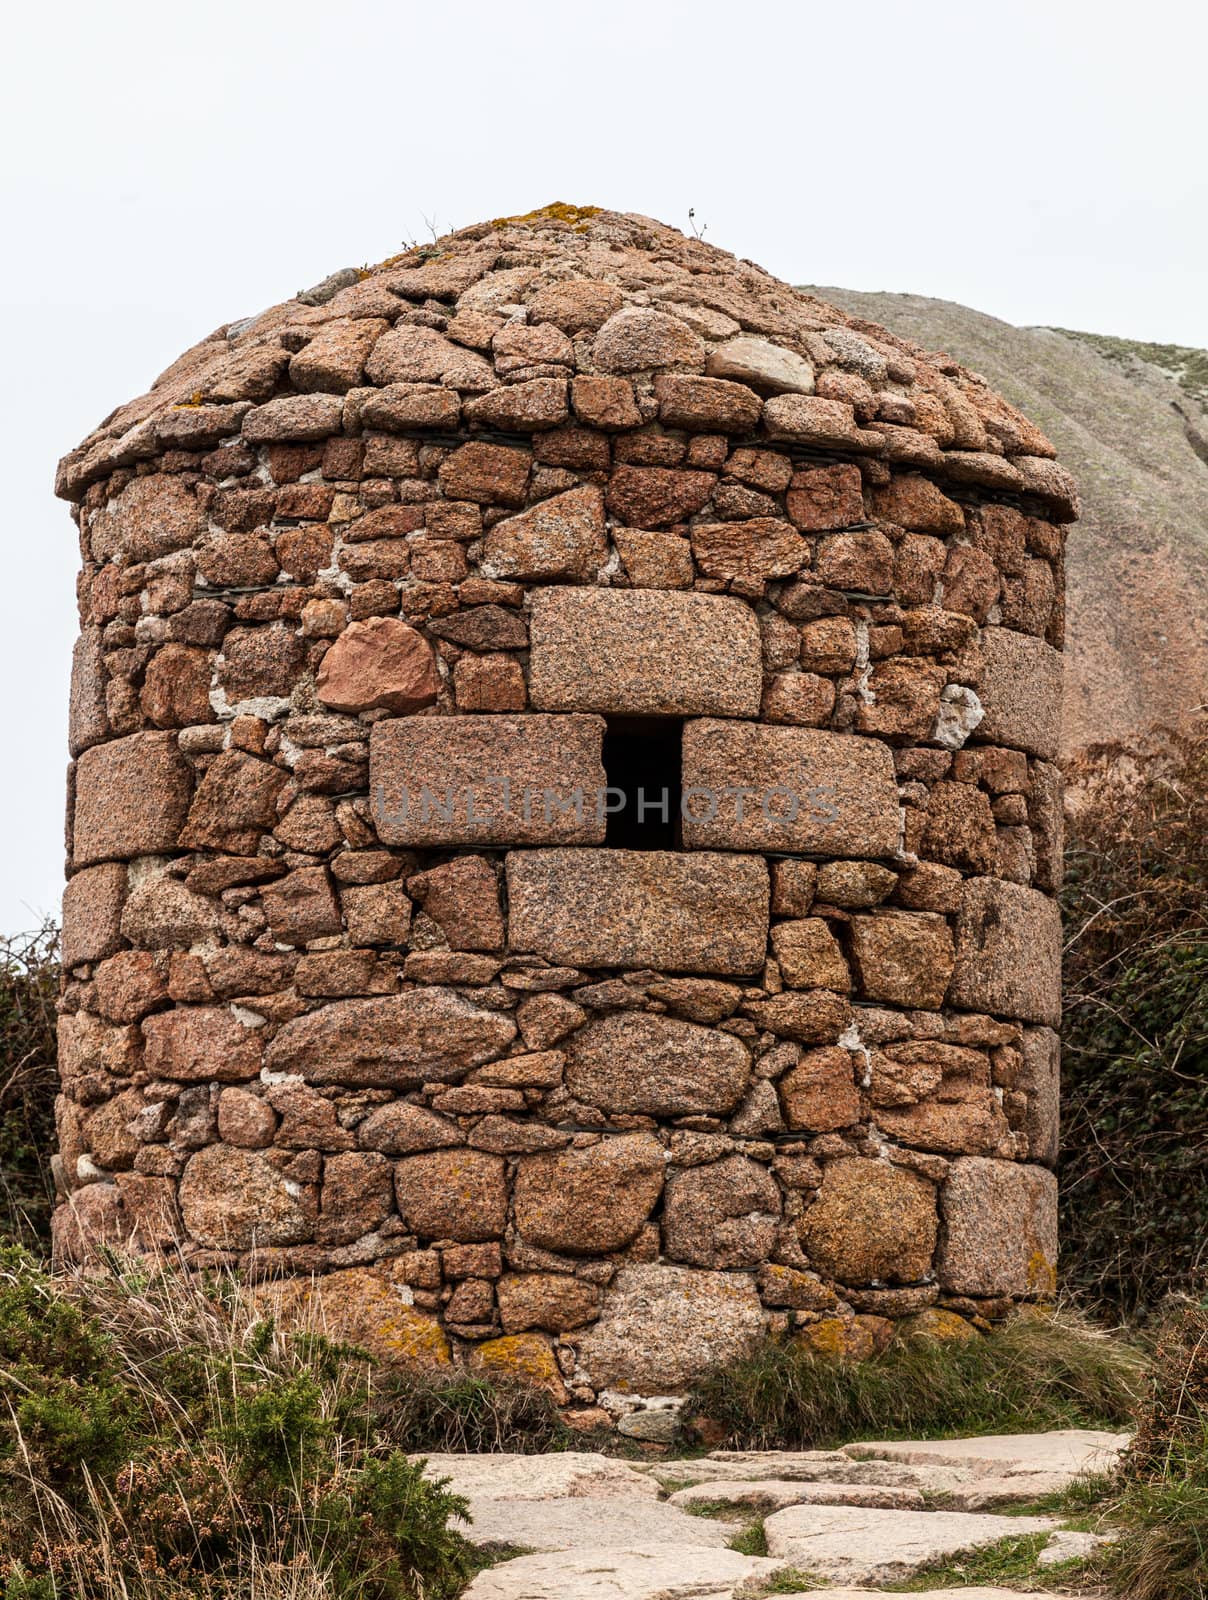 Image of a traditional stone shelter located on the Pink Granite Coast in Brittany in northern France.